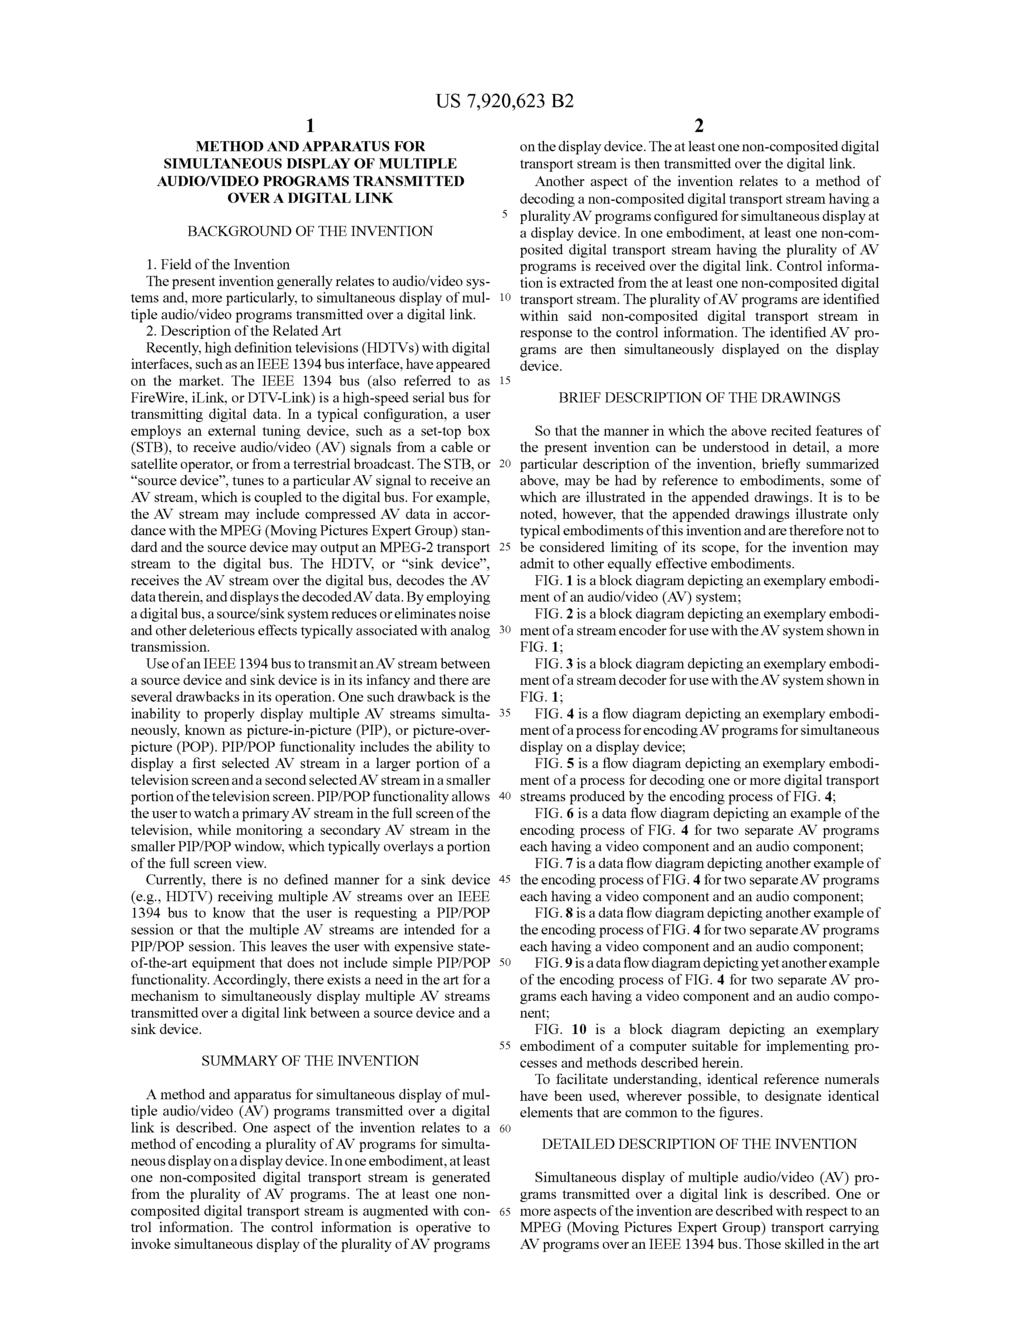 Page 6 of 11 1 METHOD AND APPARATUS FOR SIMULTANEOUS DISPLAY OF MULTIPLE AUDIO/VIDEO PROGRAMS TRANSMITTED OVER A DIGITAL LINK BACKGROUND OF THE INVENTION 1.